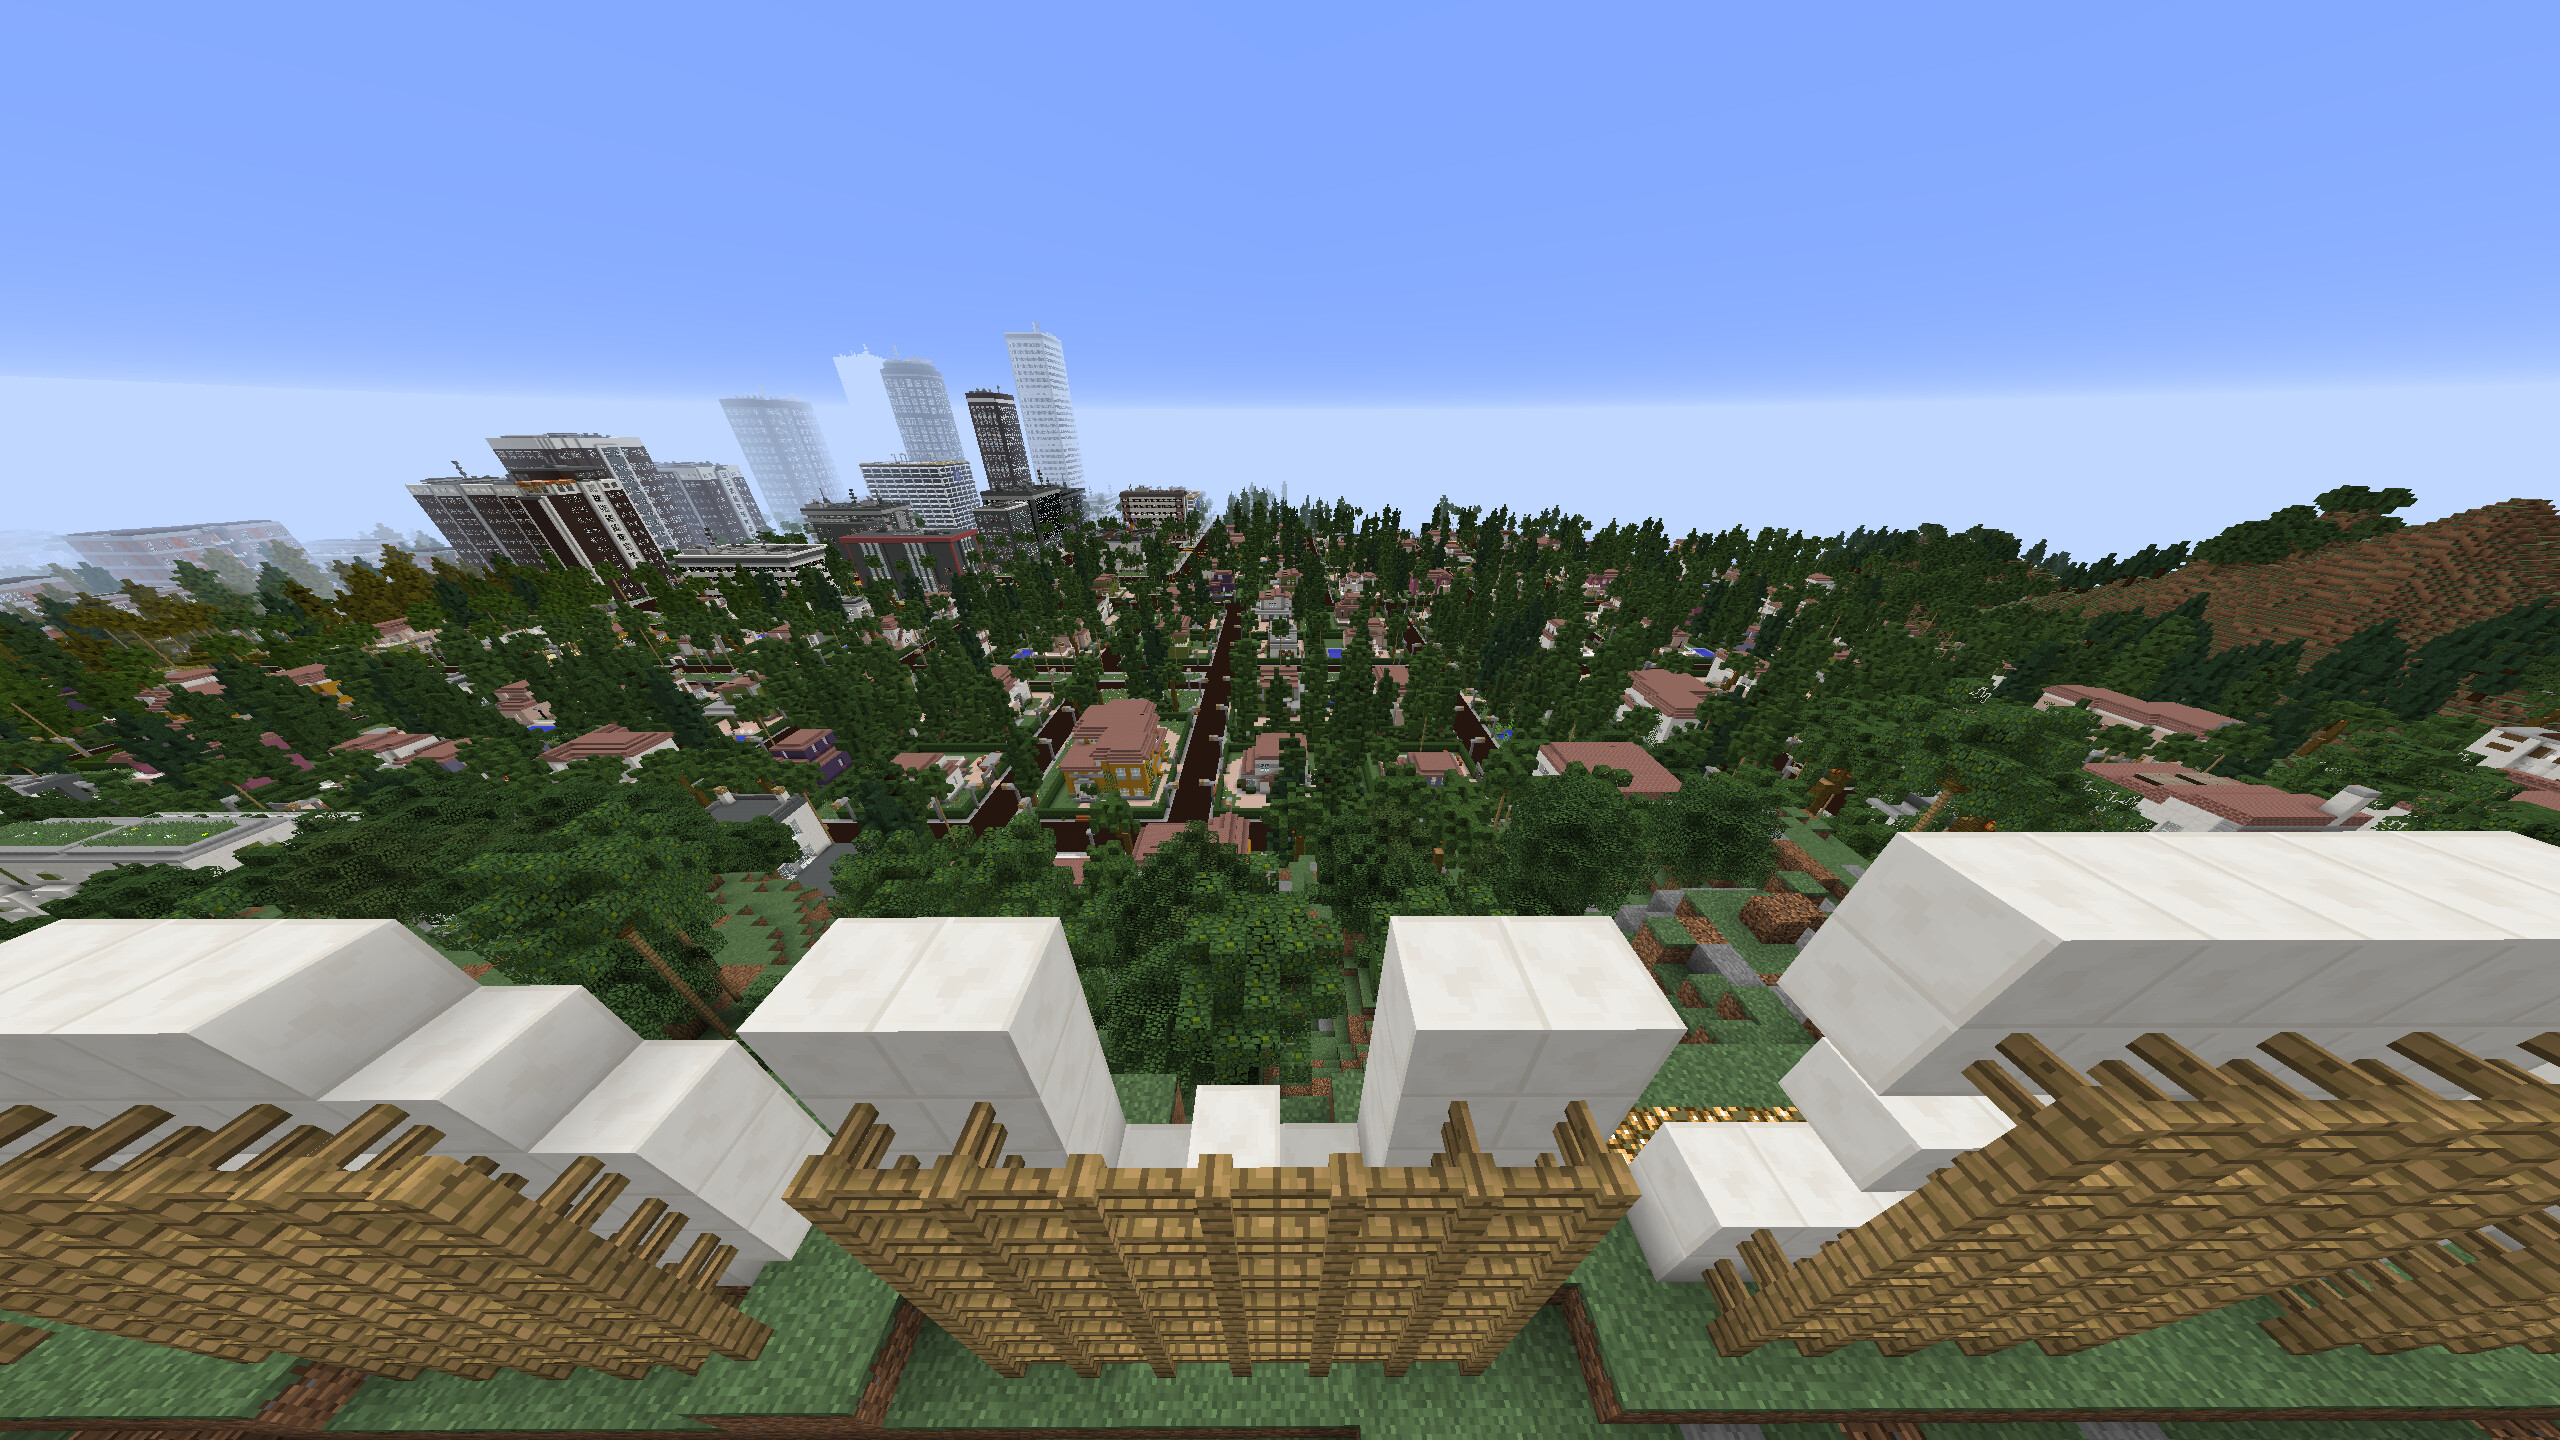 It’s Fun To Explore The Minecraft Version Of Los Angeles